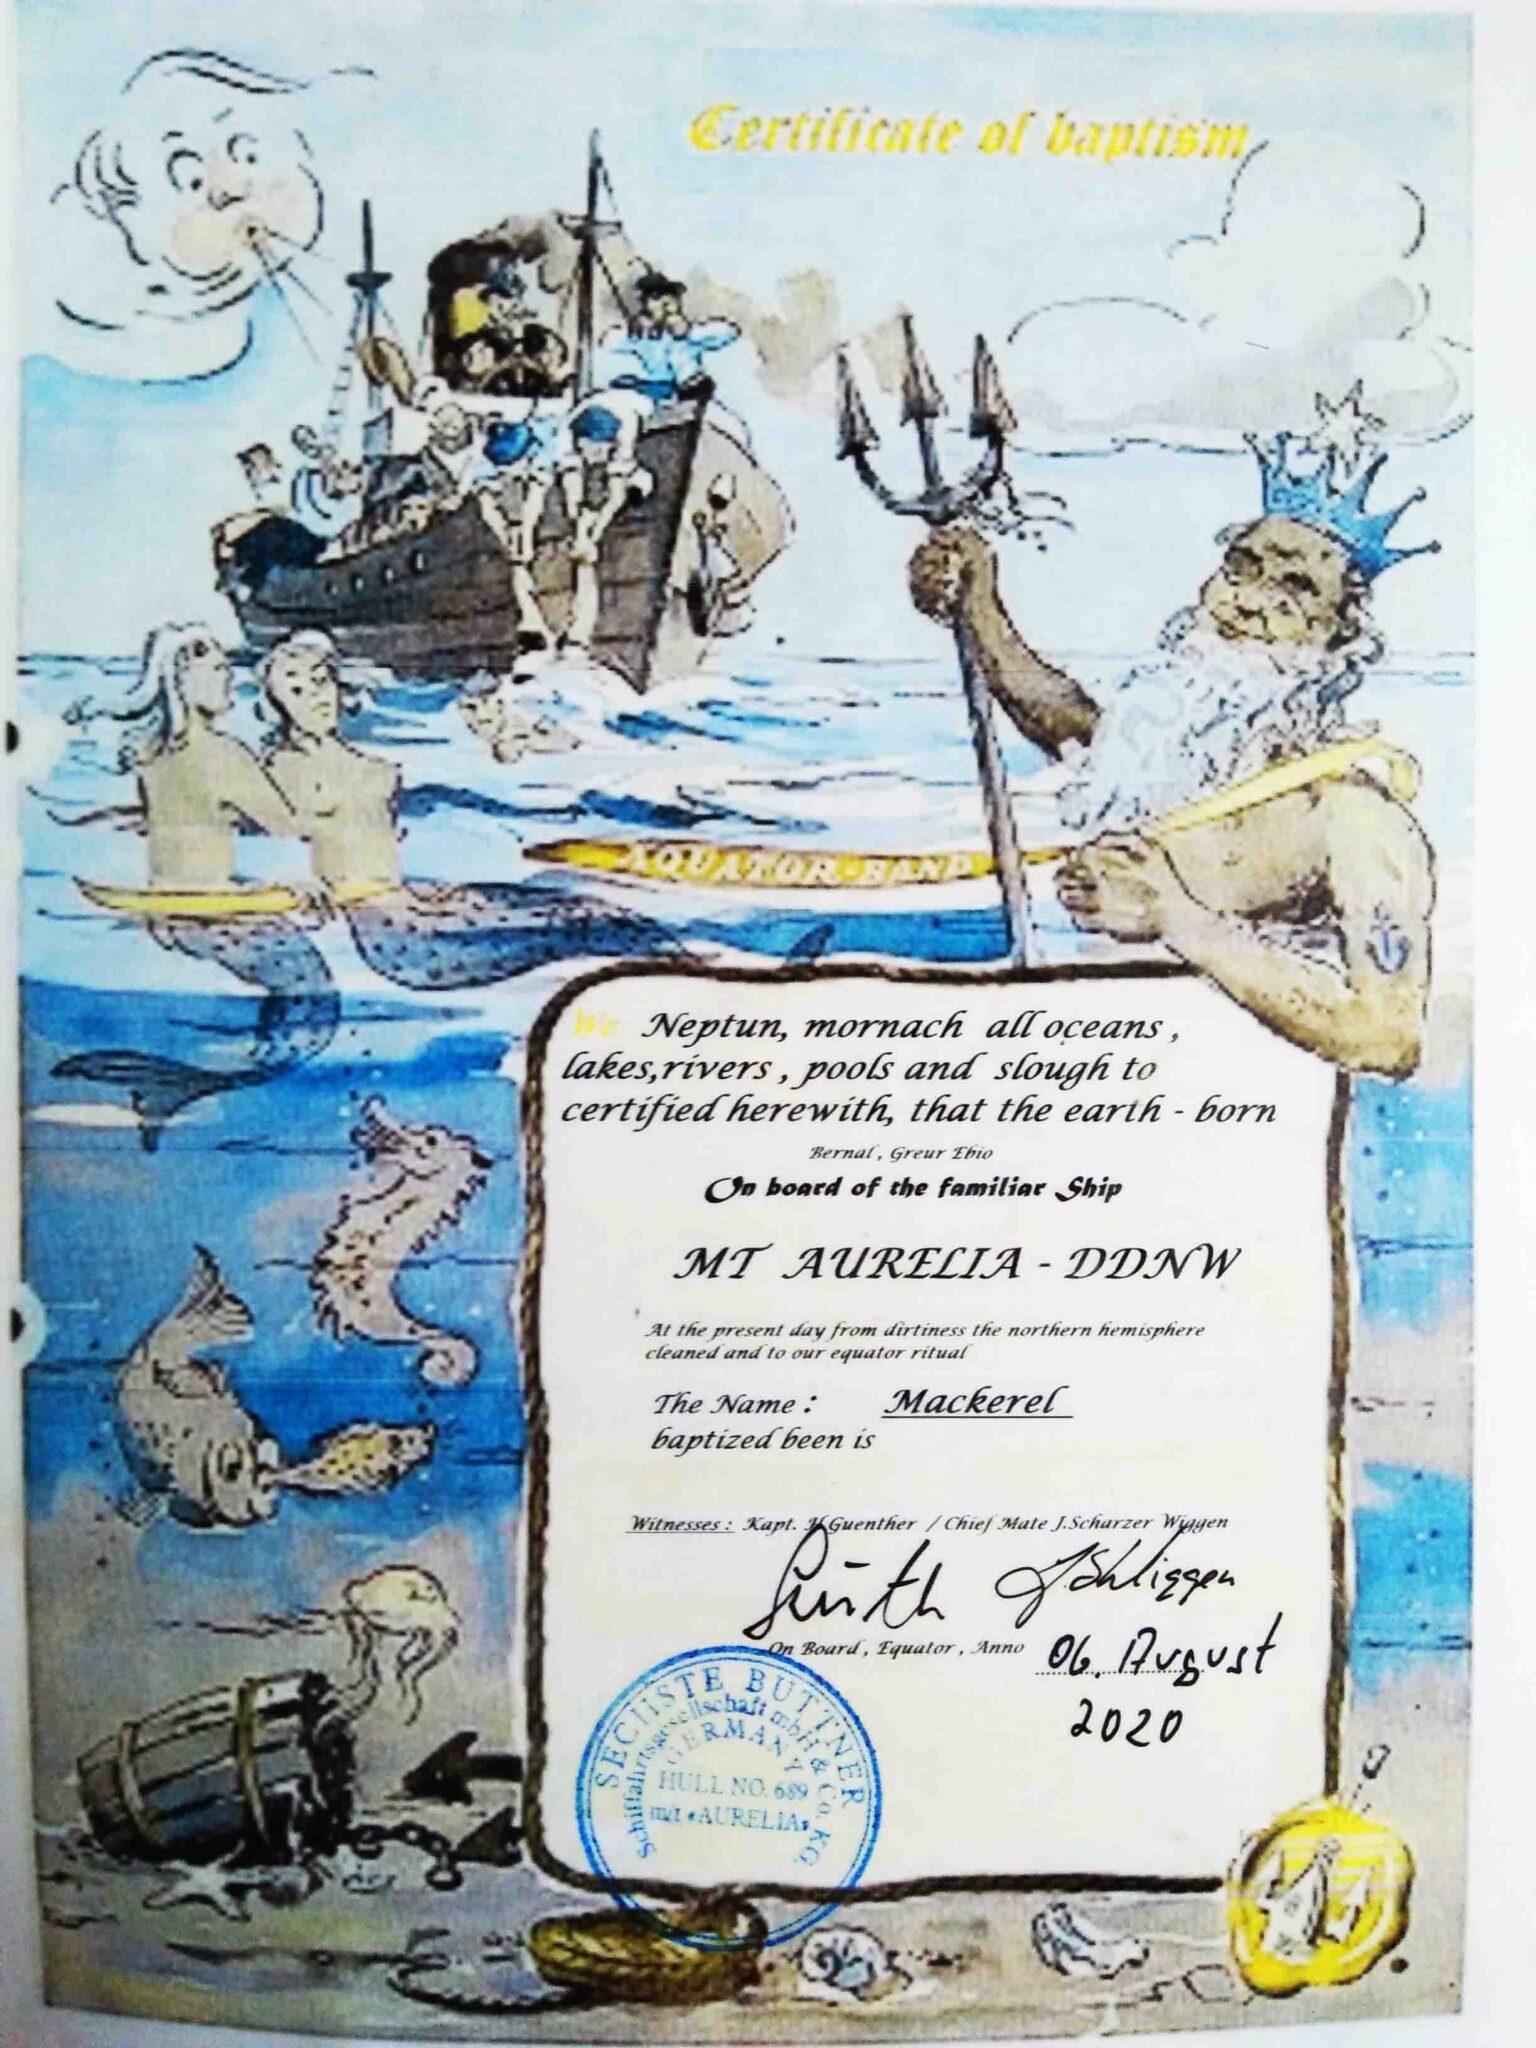 Certificate of Baptism showing our ship's name, callsign, new name, and date of crossing the Equator. This certificate is given after our line crossing ceremony.